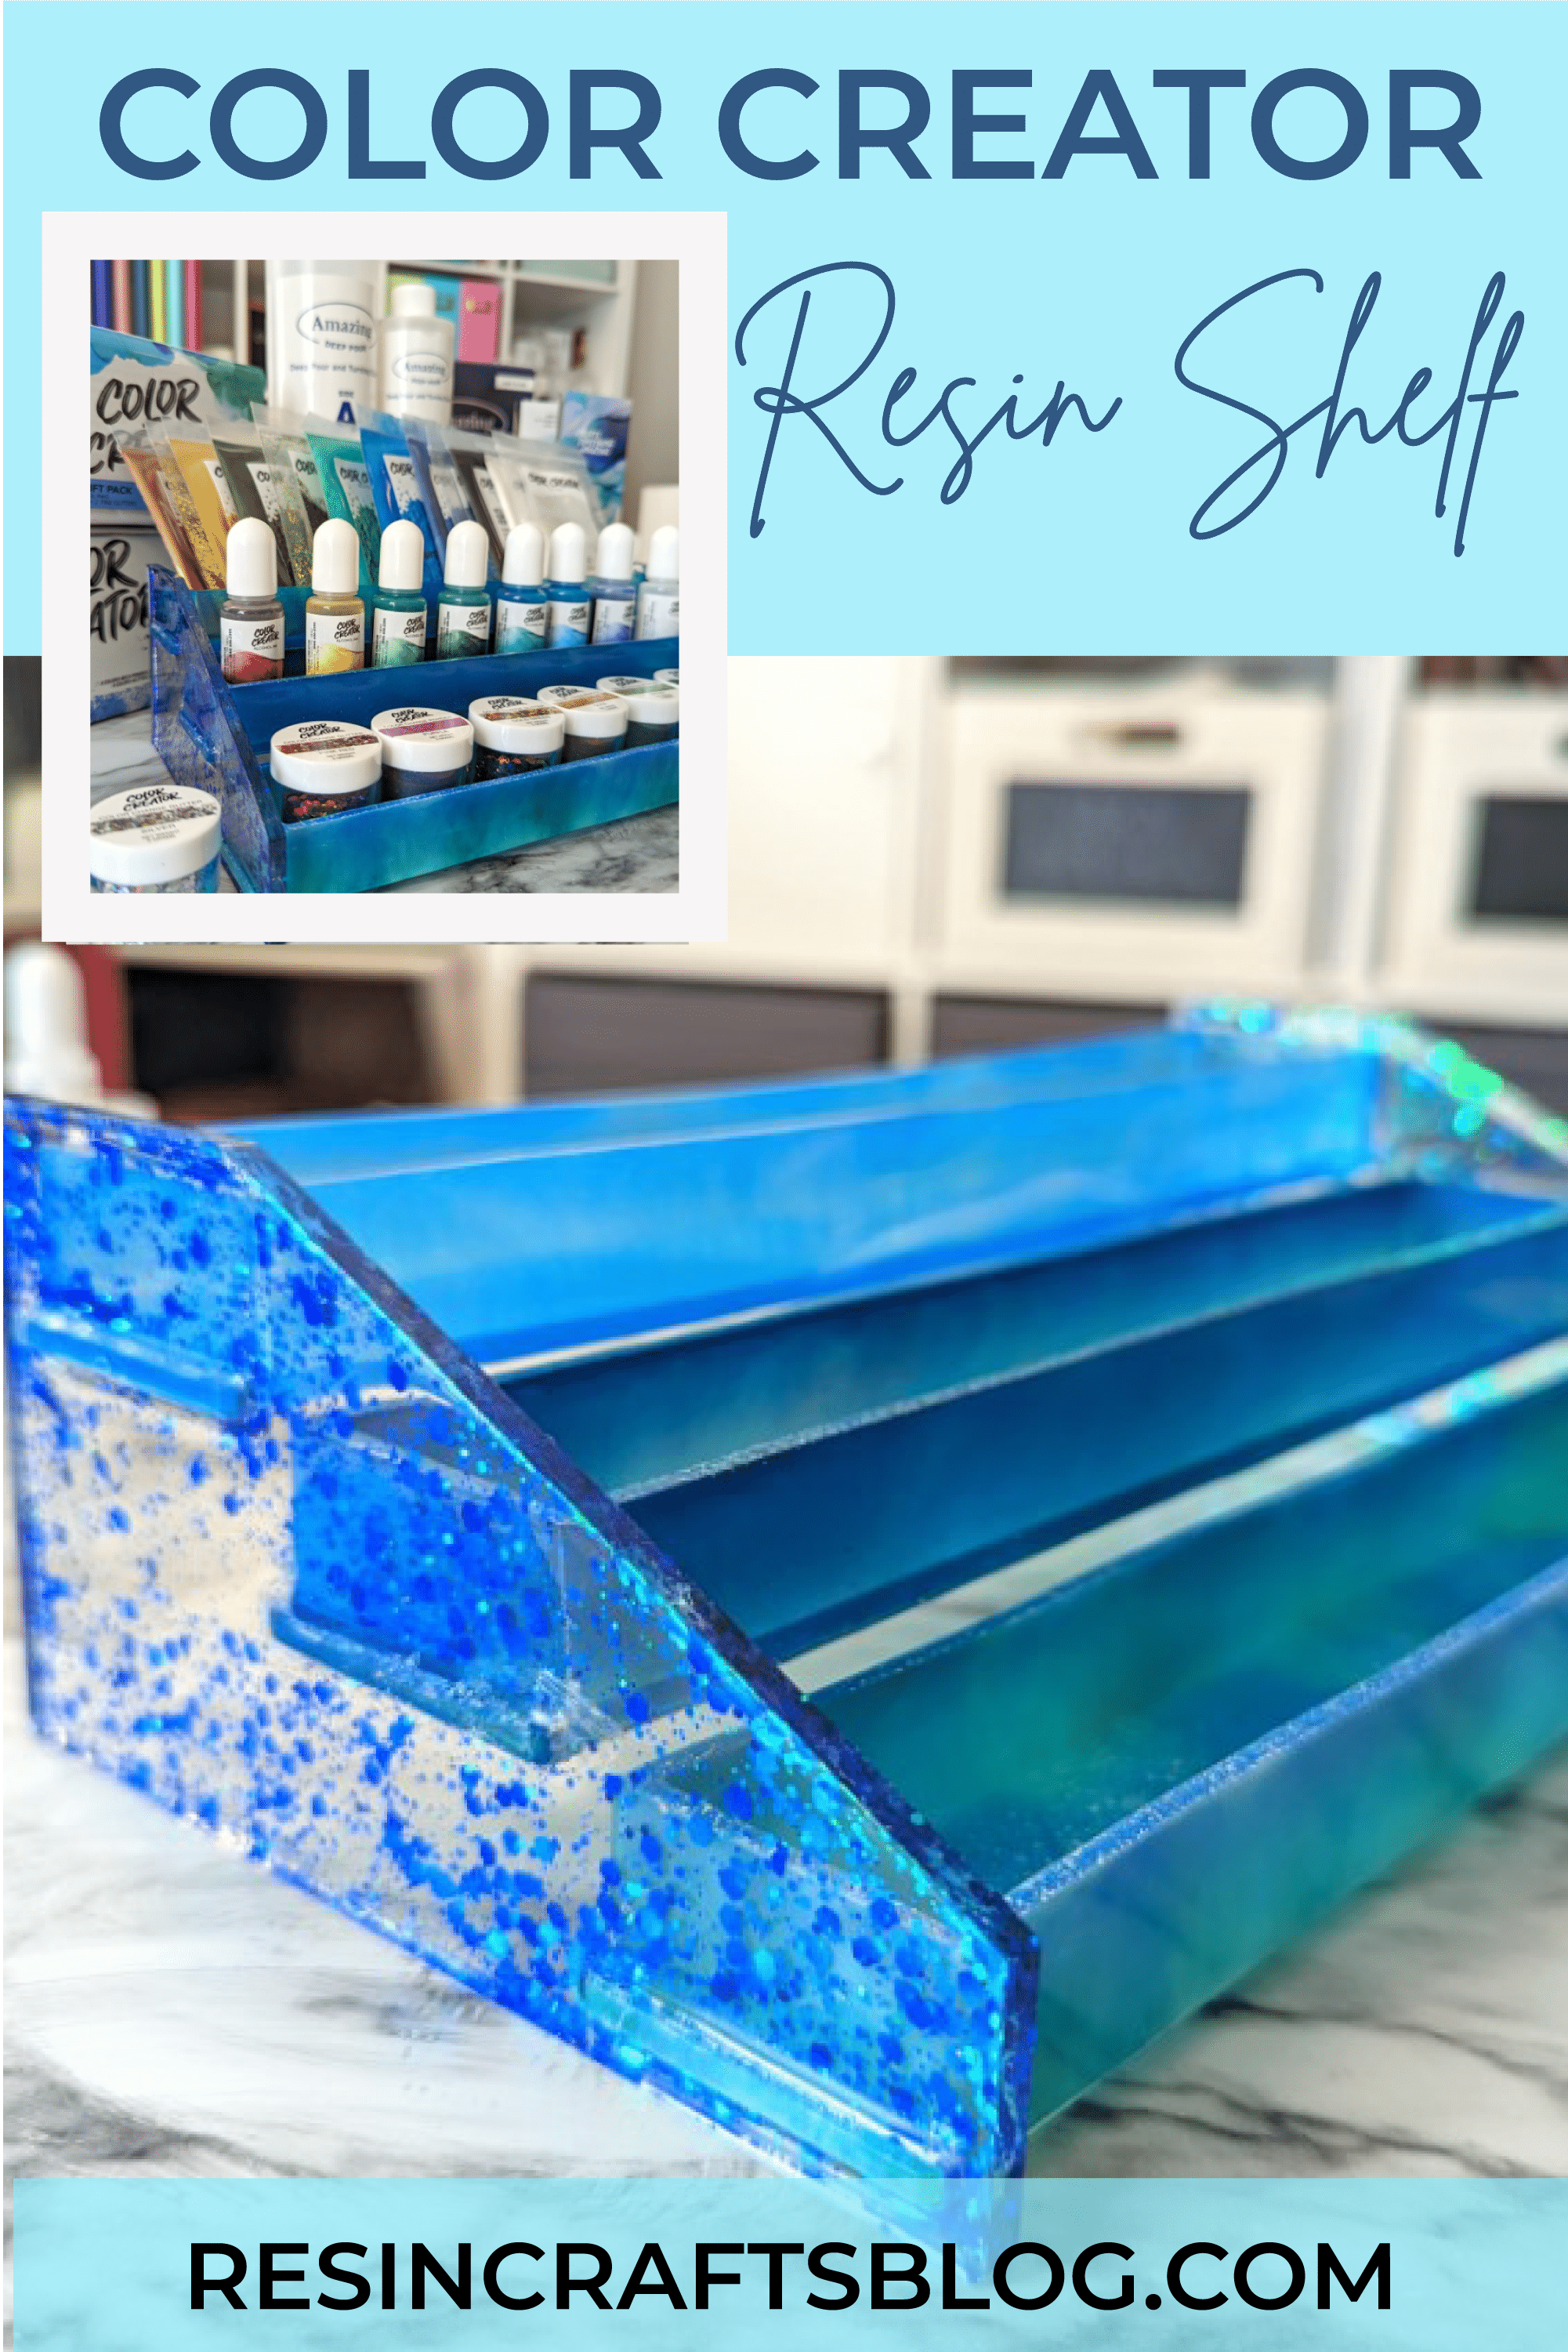 Learn how to use Color Creator mica powder and alcohol ink with resin and a silicone mold to create storage shelve to be proud of! via @resincraftsblog